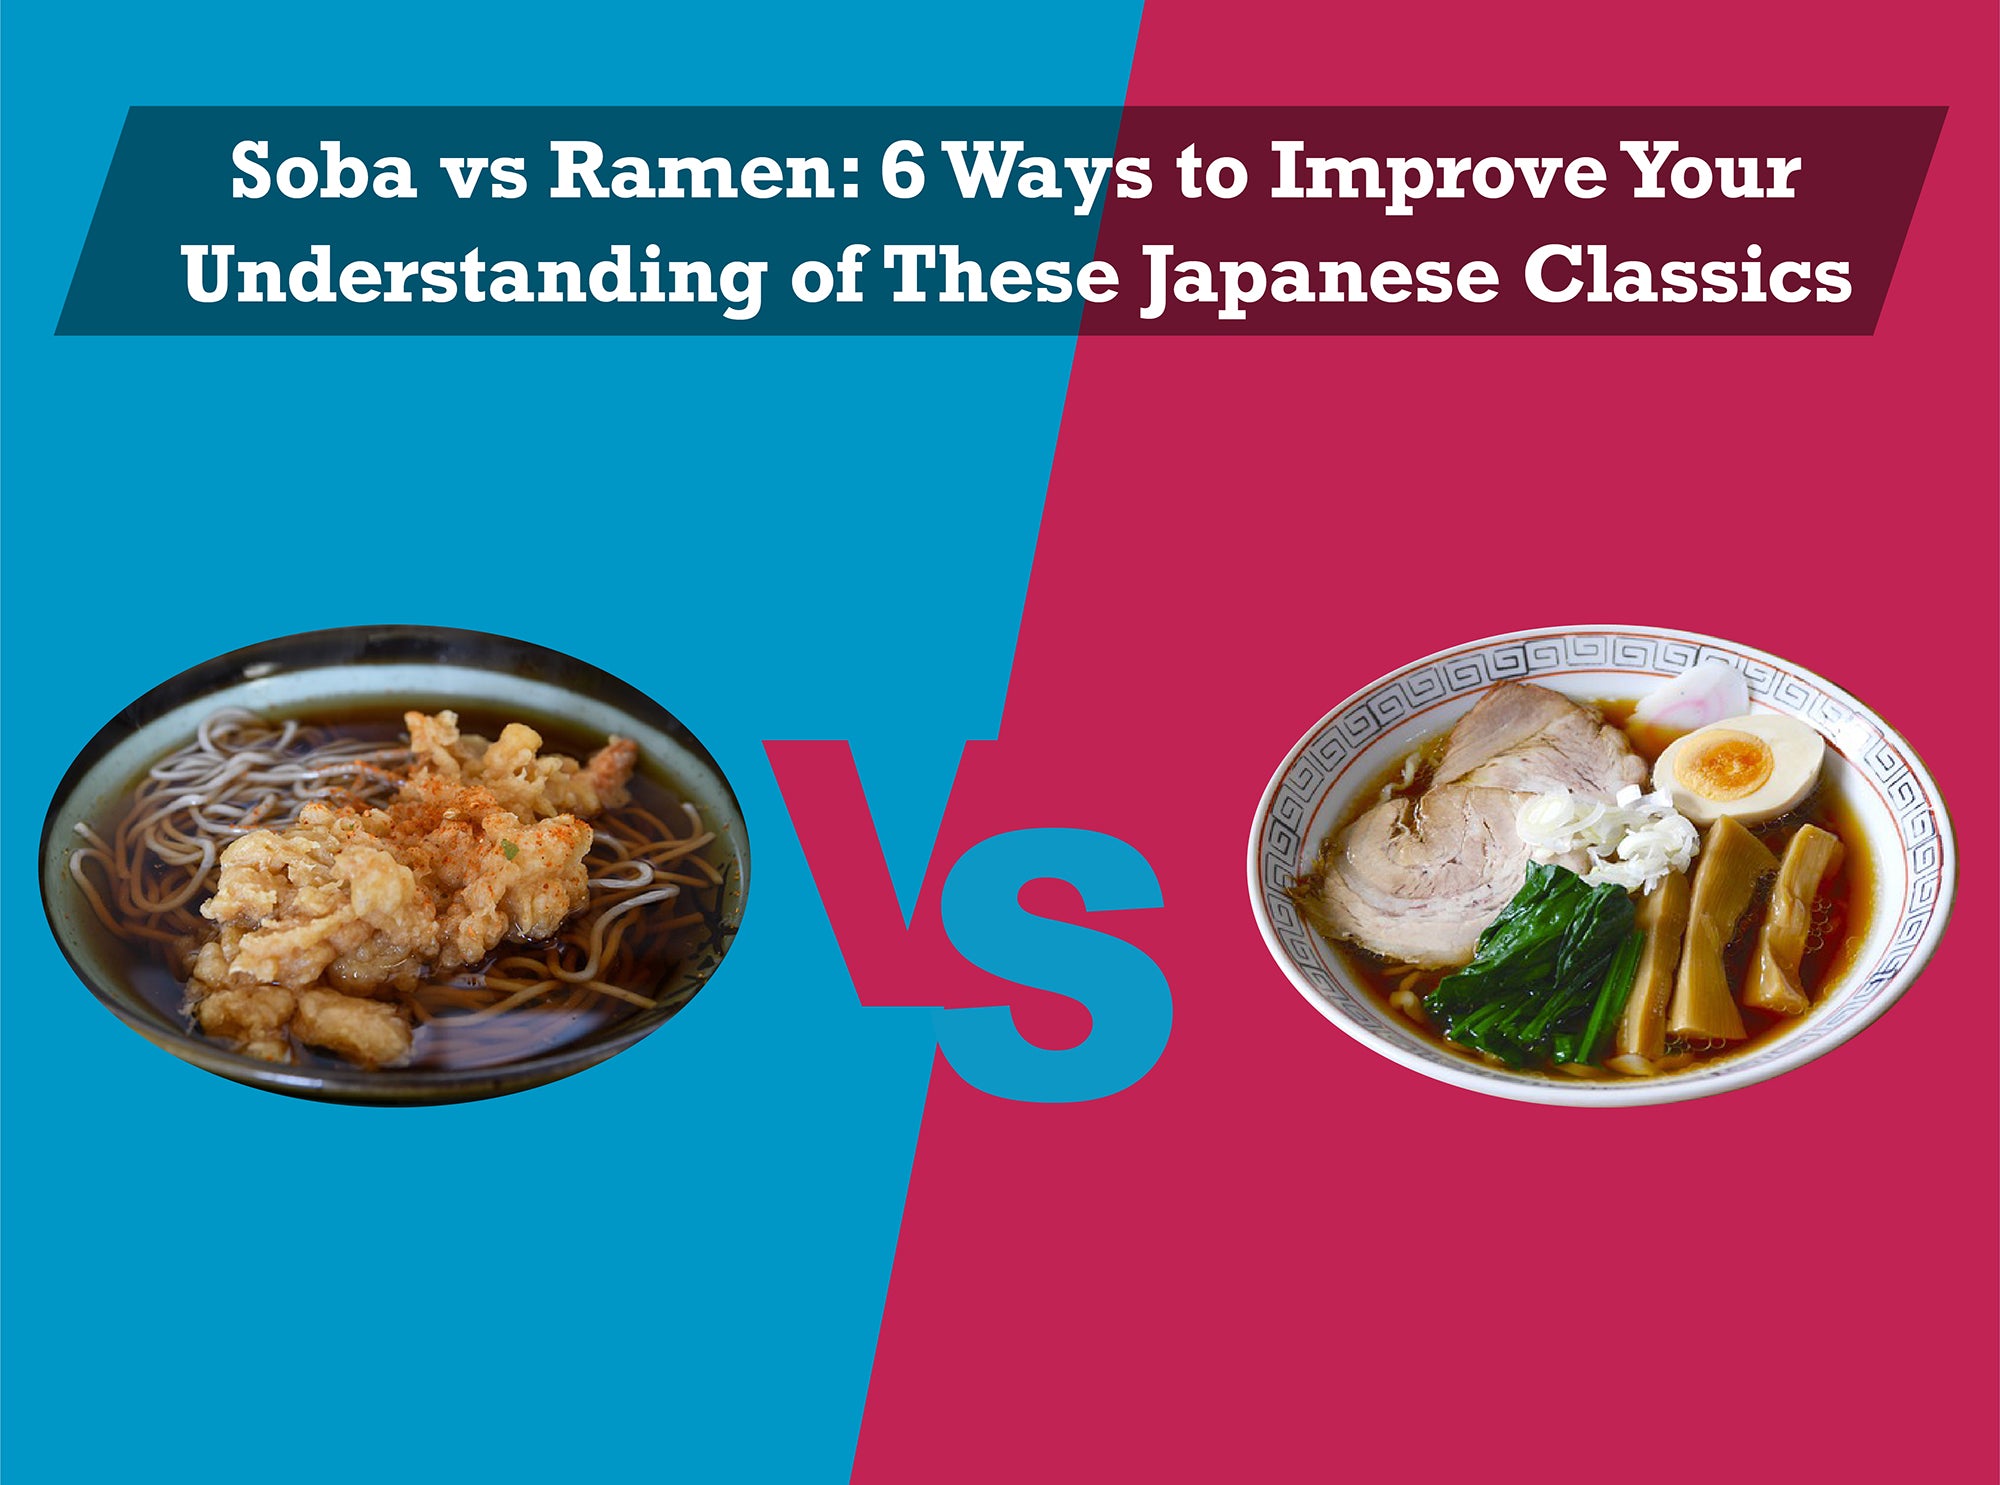 Soba vs Ramen: 6 Ways to Improve Your Understanding of These Japanese Classics